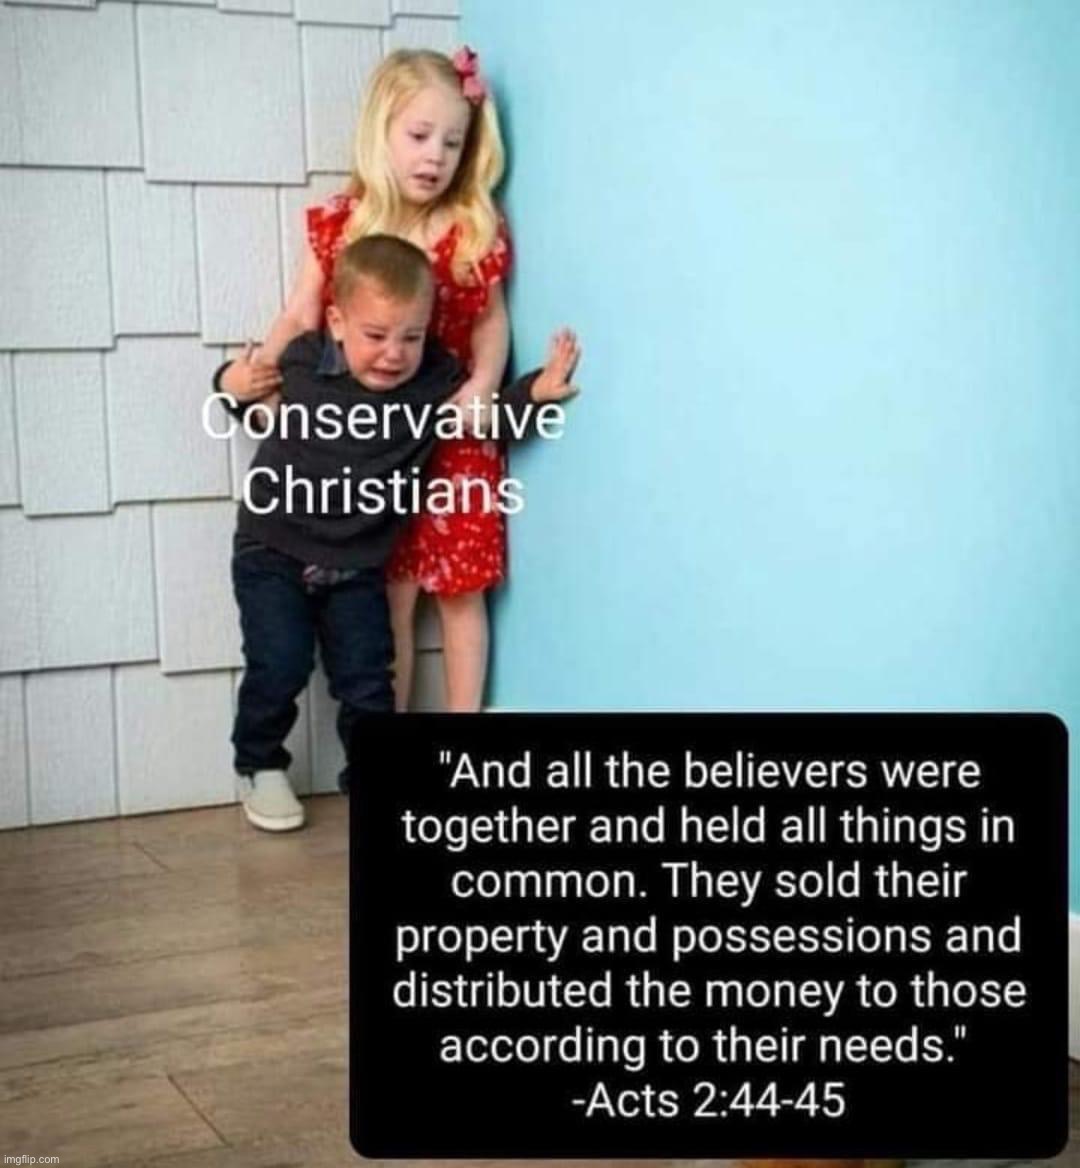 Conservative Christians vs. acts 2:44-45 | image tagged in conservative christians vs acts 2 44-45,conservative,christians,socialism,socialist,bible verses | made w/ Imgflip meme maker